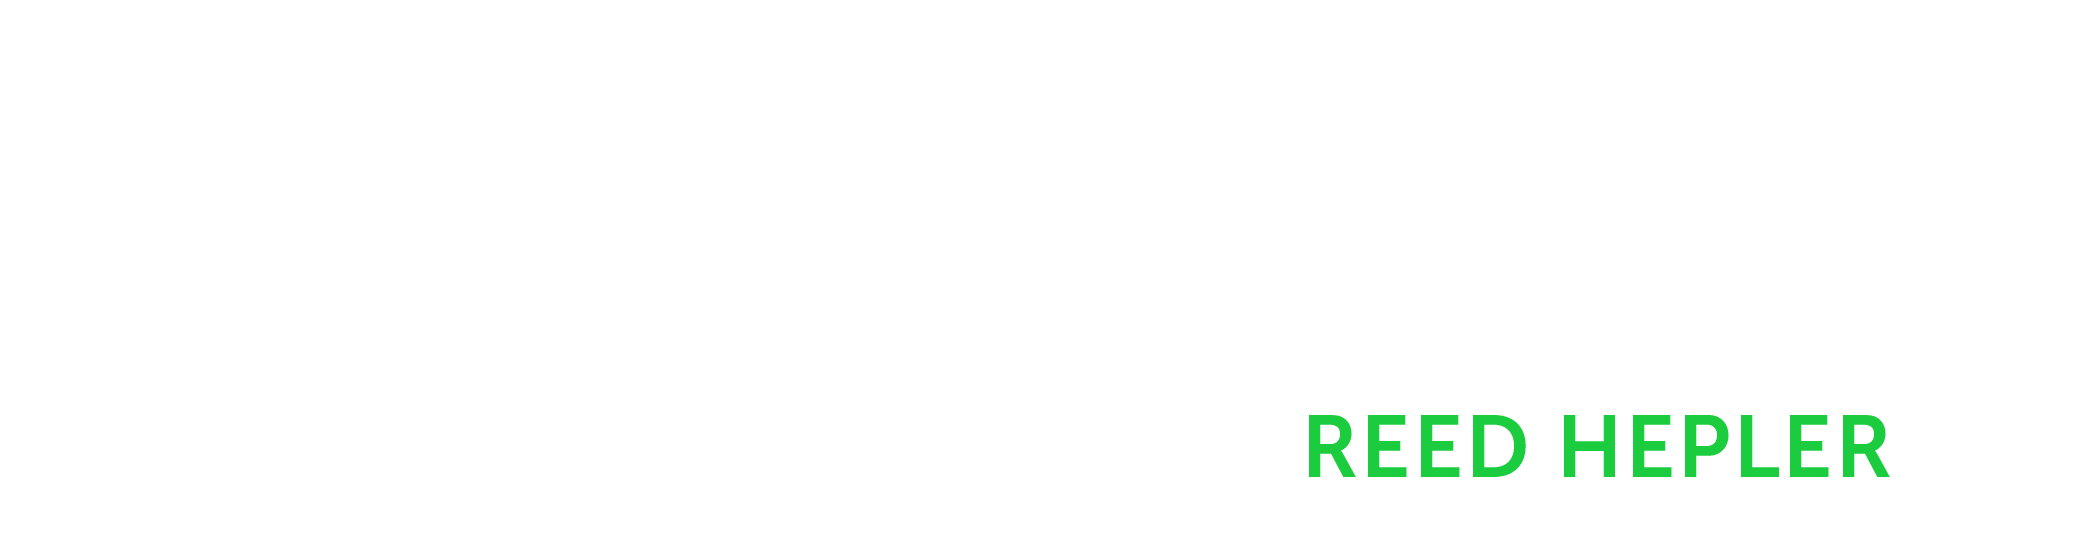 The logo of Hepler Consulting